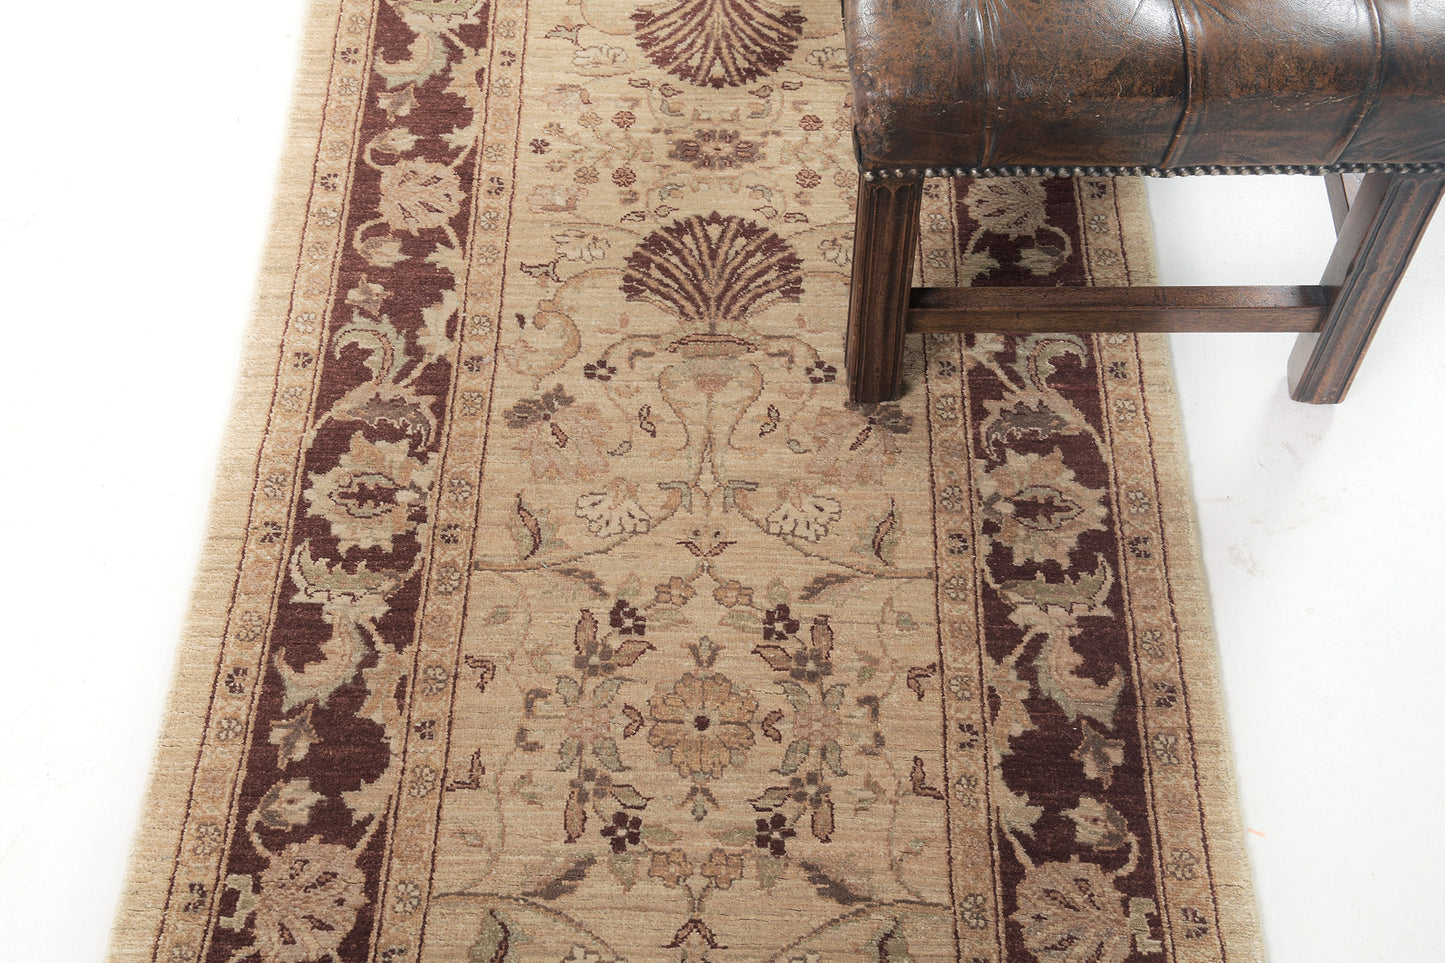 Natural Dye Antique Revival Tabriz Fable Collection Runner